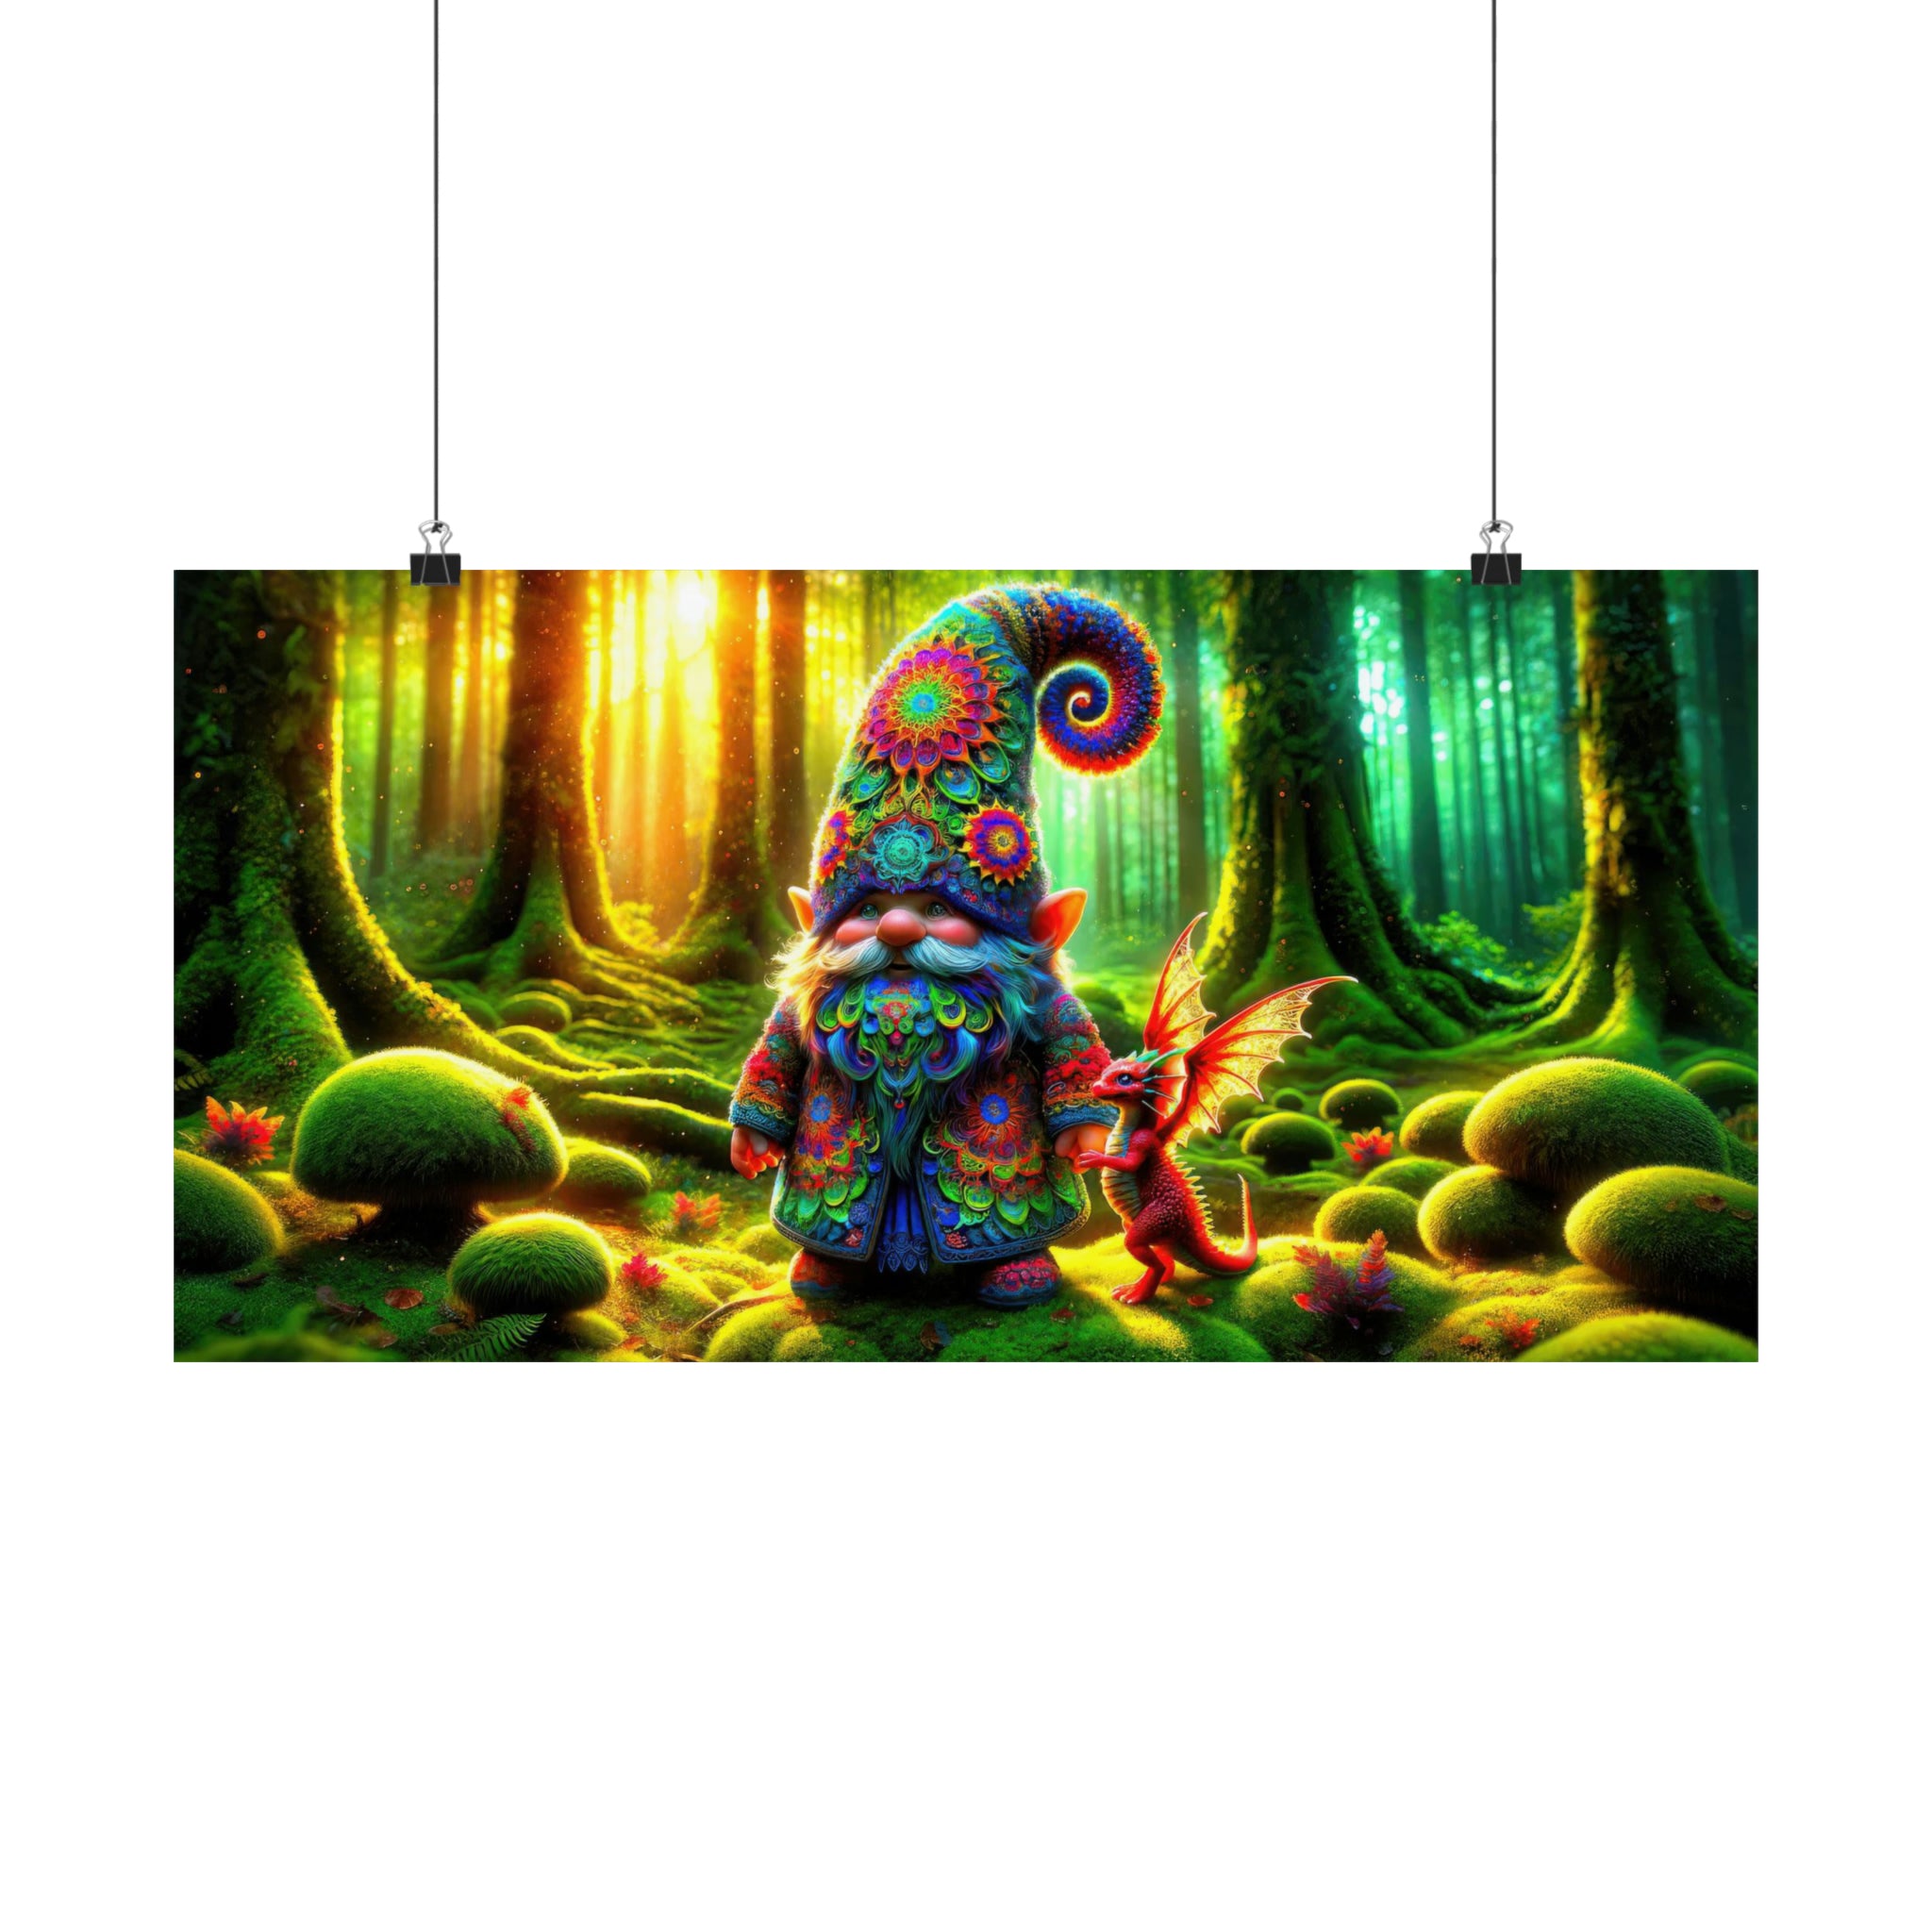 The Gnome's Morning in Enchanted Woods Poster